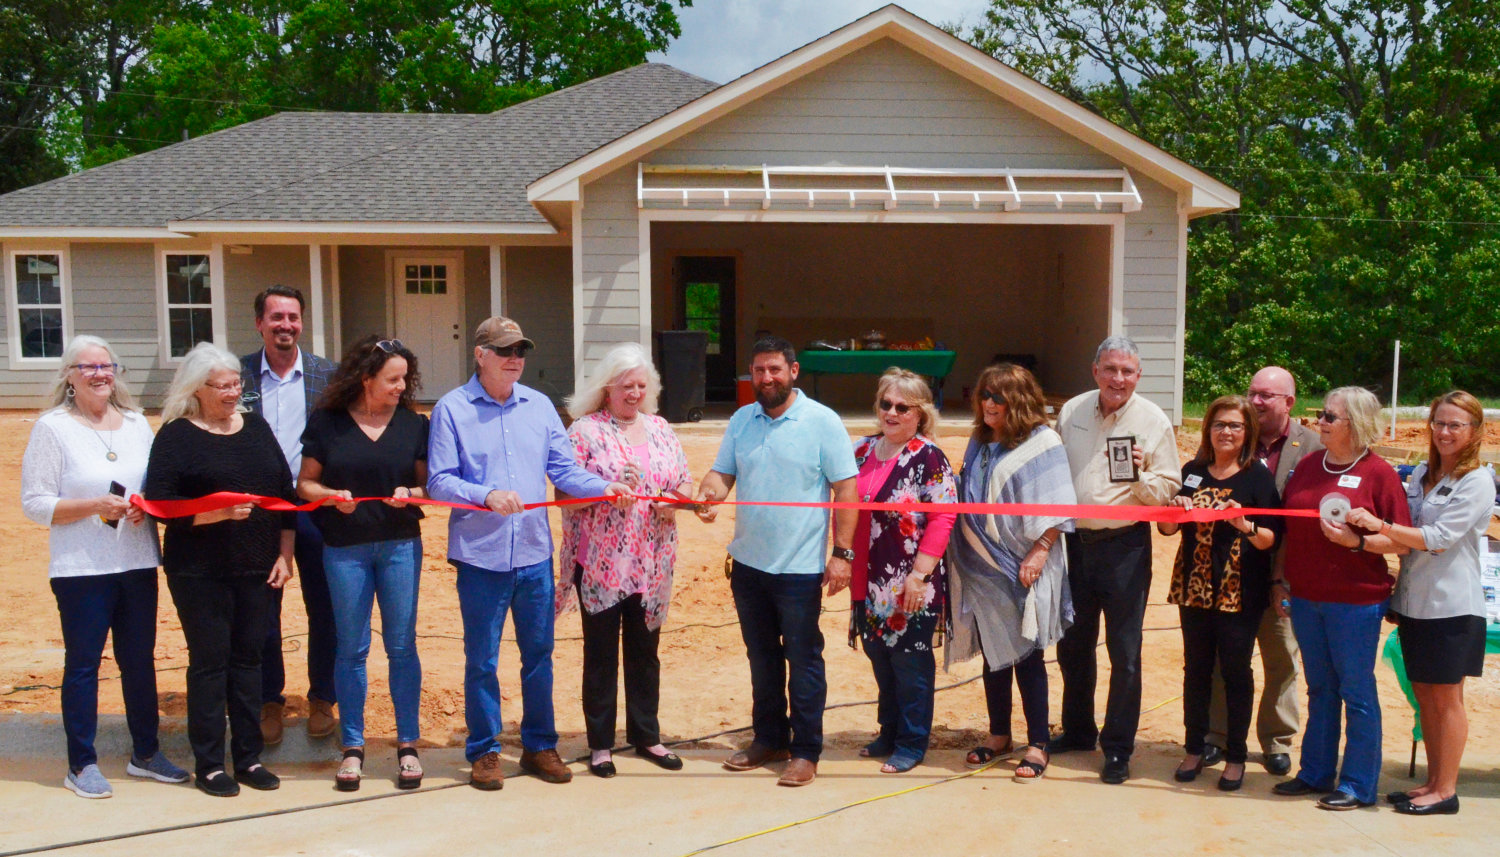 City officials joined builder Peter Woolford, members of the Blackmon family and real estate agents for a ribbon cutting at Blackmon Meadows last Wednesday in Mineola.